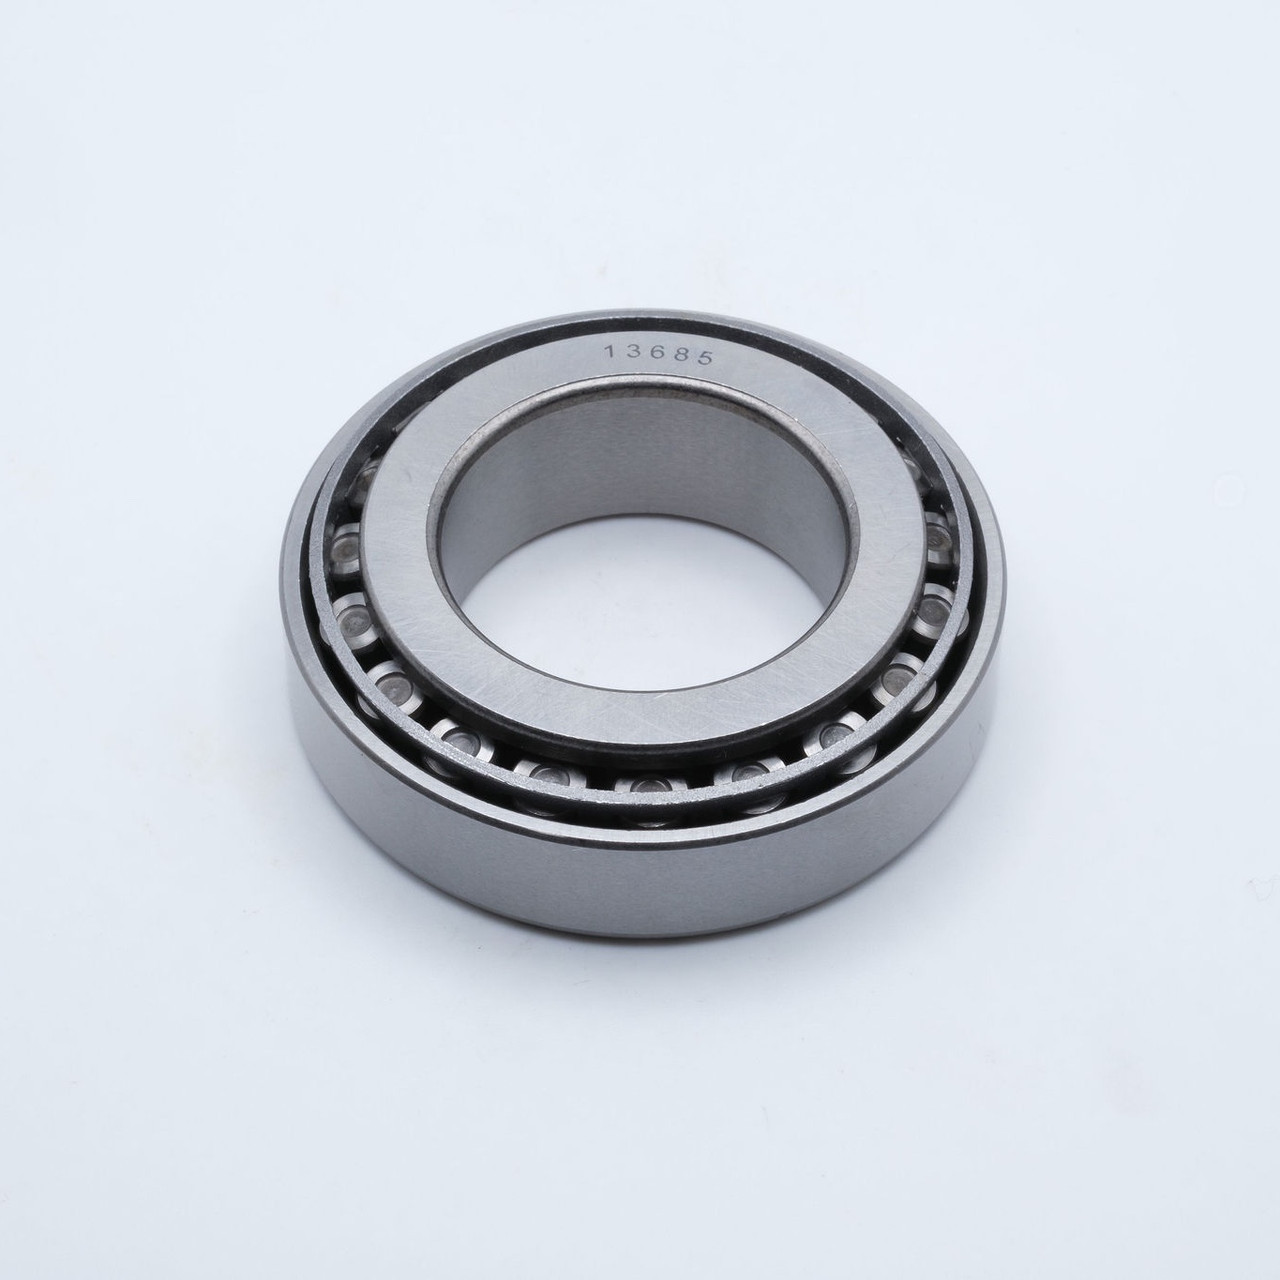 15113+15250 Tapered Roller Bearing 1-1/8x2-1/2x13/16" Back View